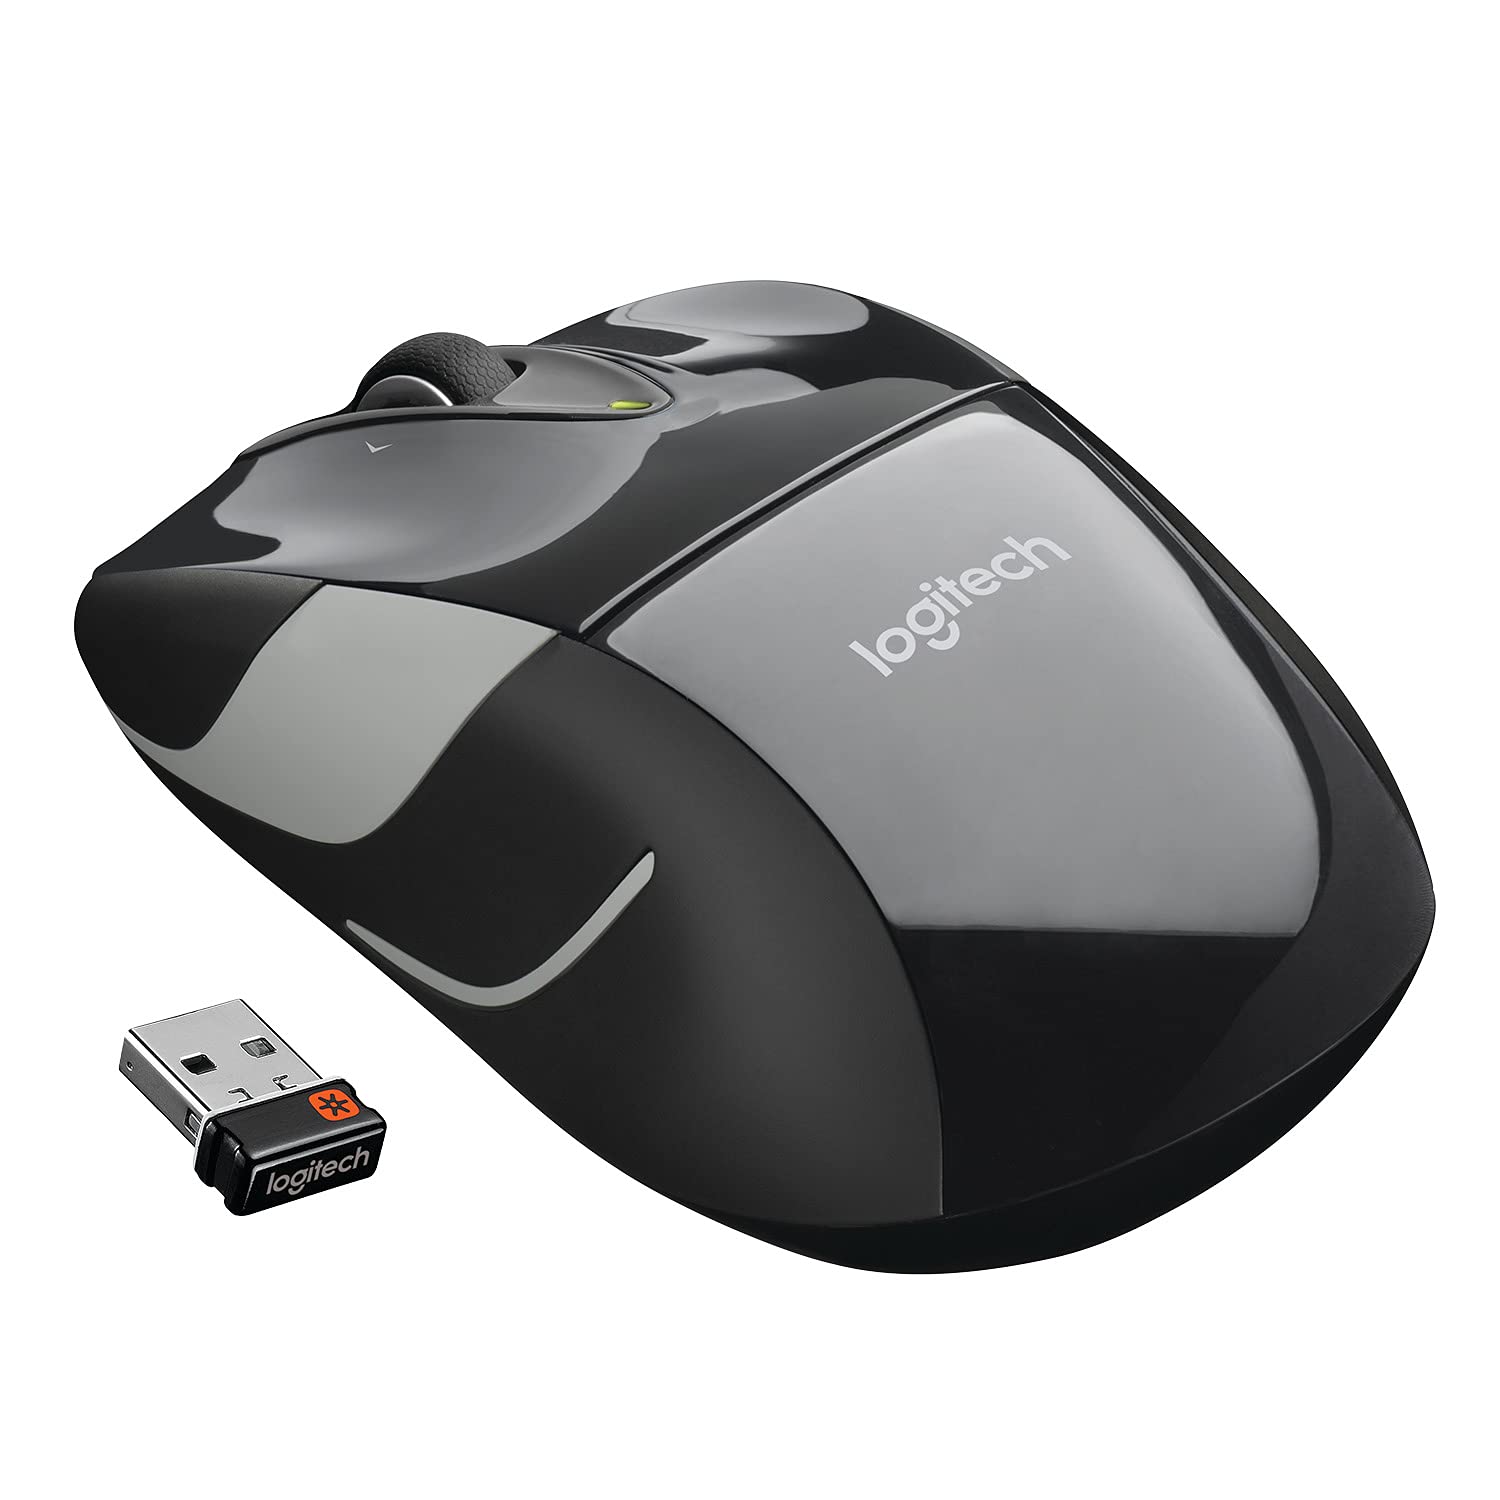 Mua Logitech M525 Wireless Mouse – Long 3 Year Battery Life, Ergonomic  Shape for Right or Left Hand Use, Micro-Precision Scroll Wheel, and USB  Unifying Receiver for Computers and Laptops, Black/Gray trên